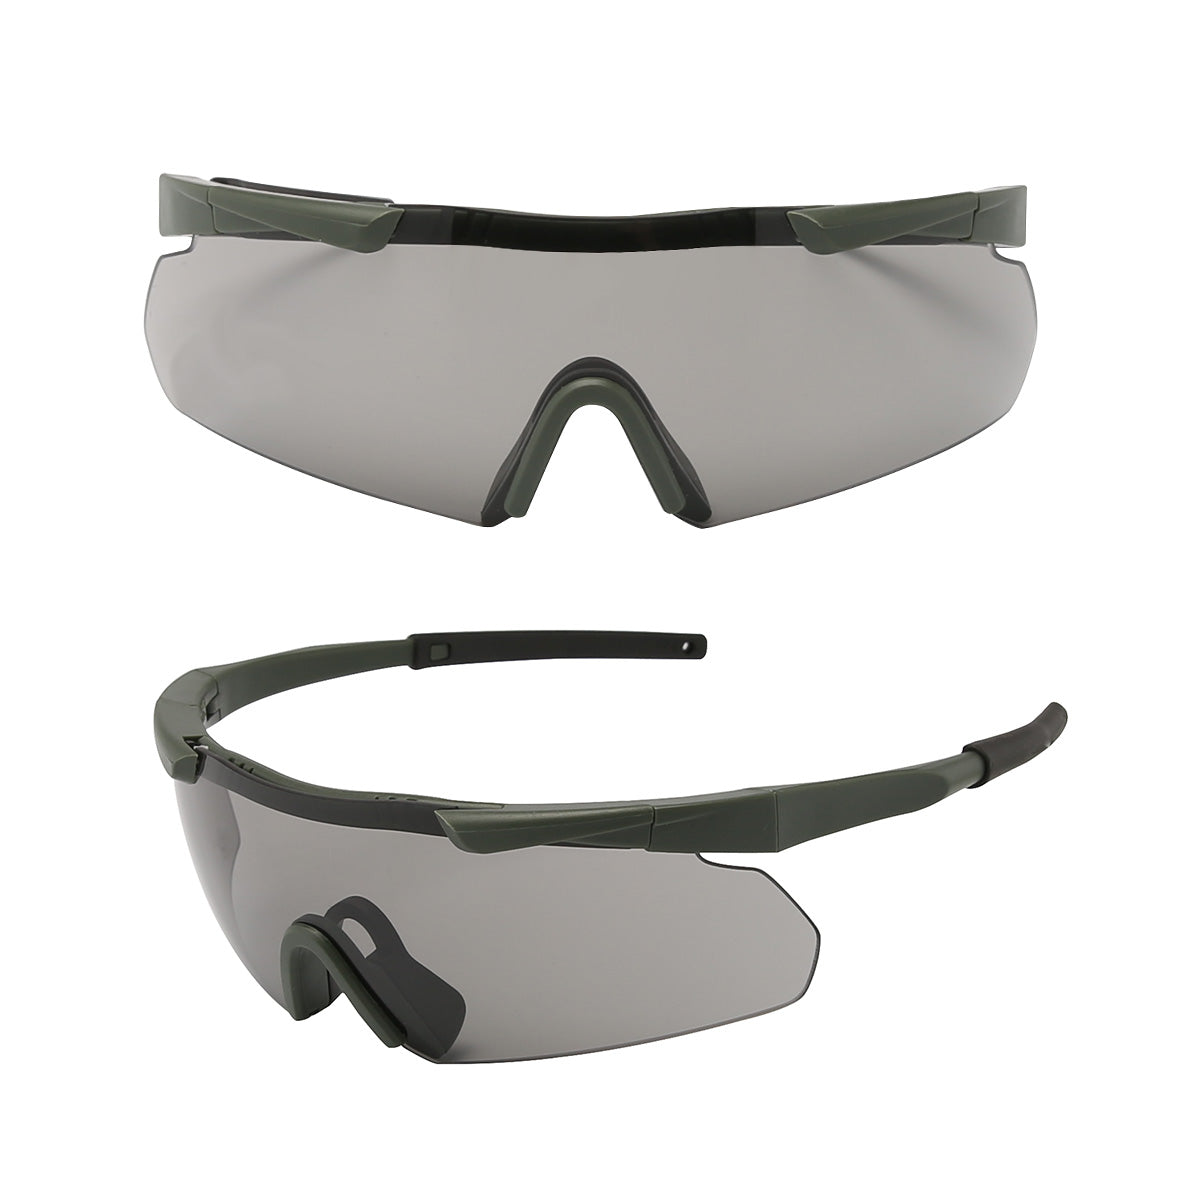 Sporty cycling sunglasses with 3 interchangeable color lenses